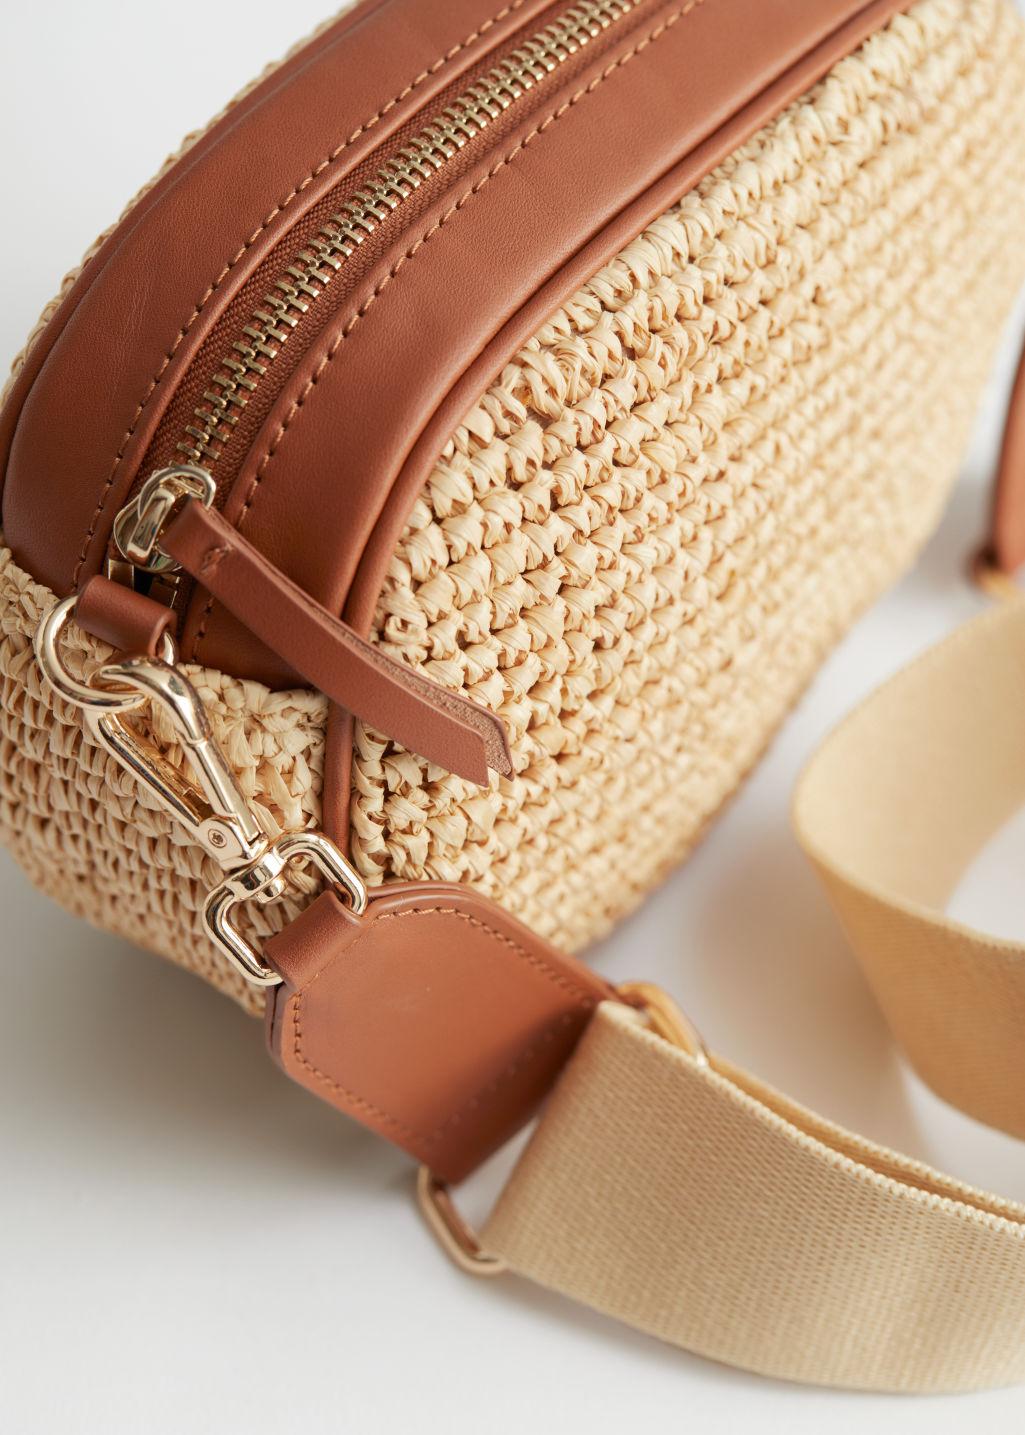 & Other Stories Crossbody Straw Bag in Natural | Lyst